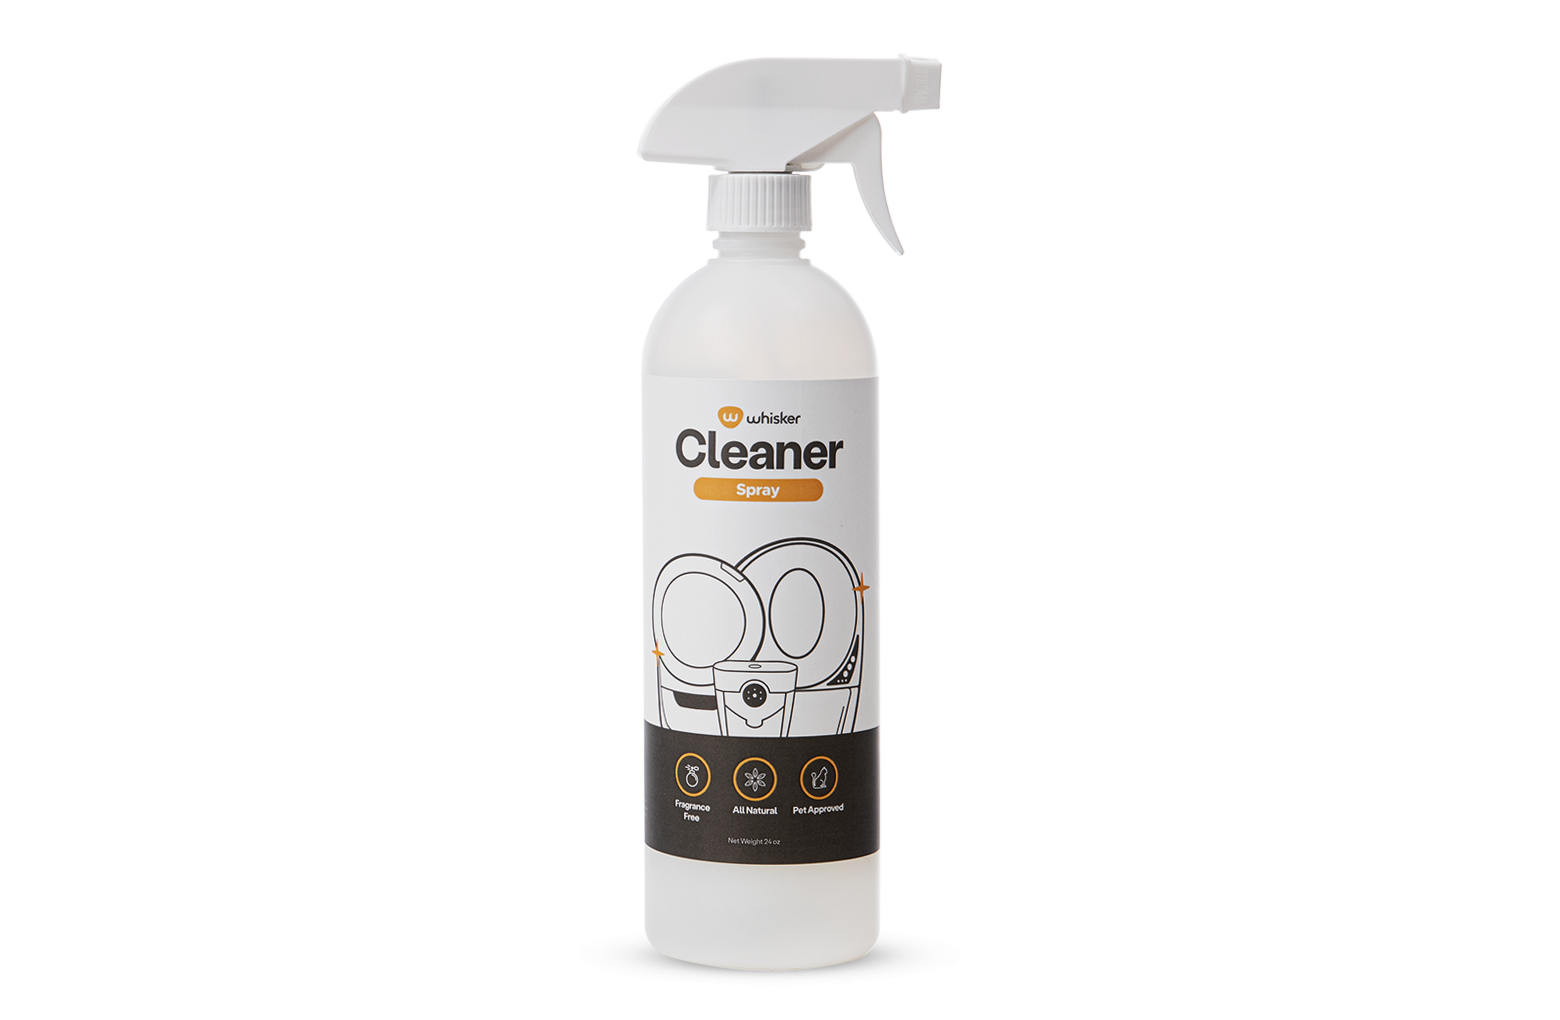 Cleaner Spray by Whisker